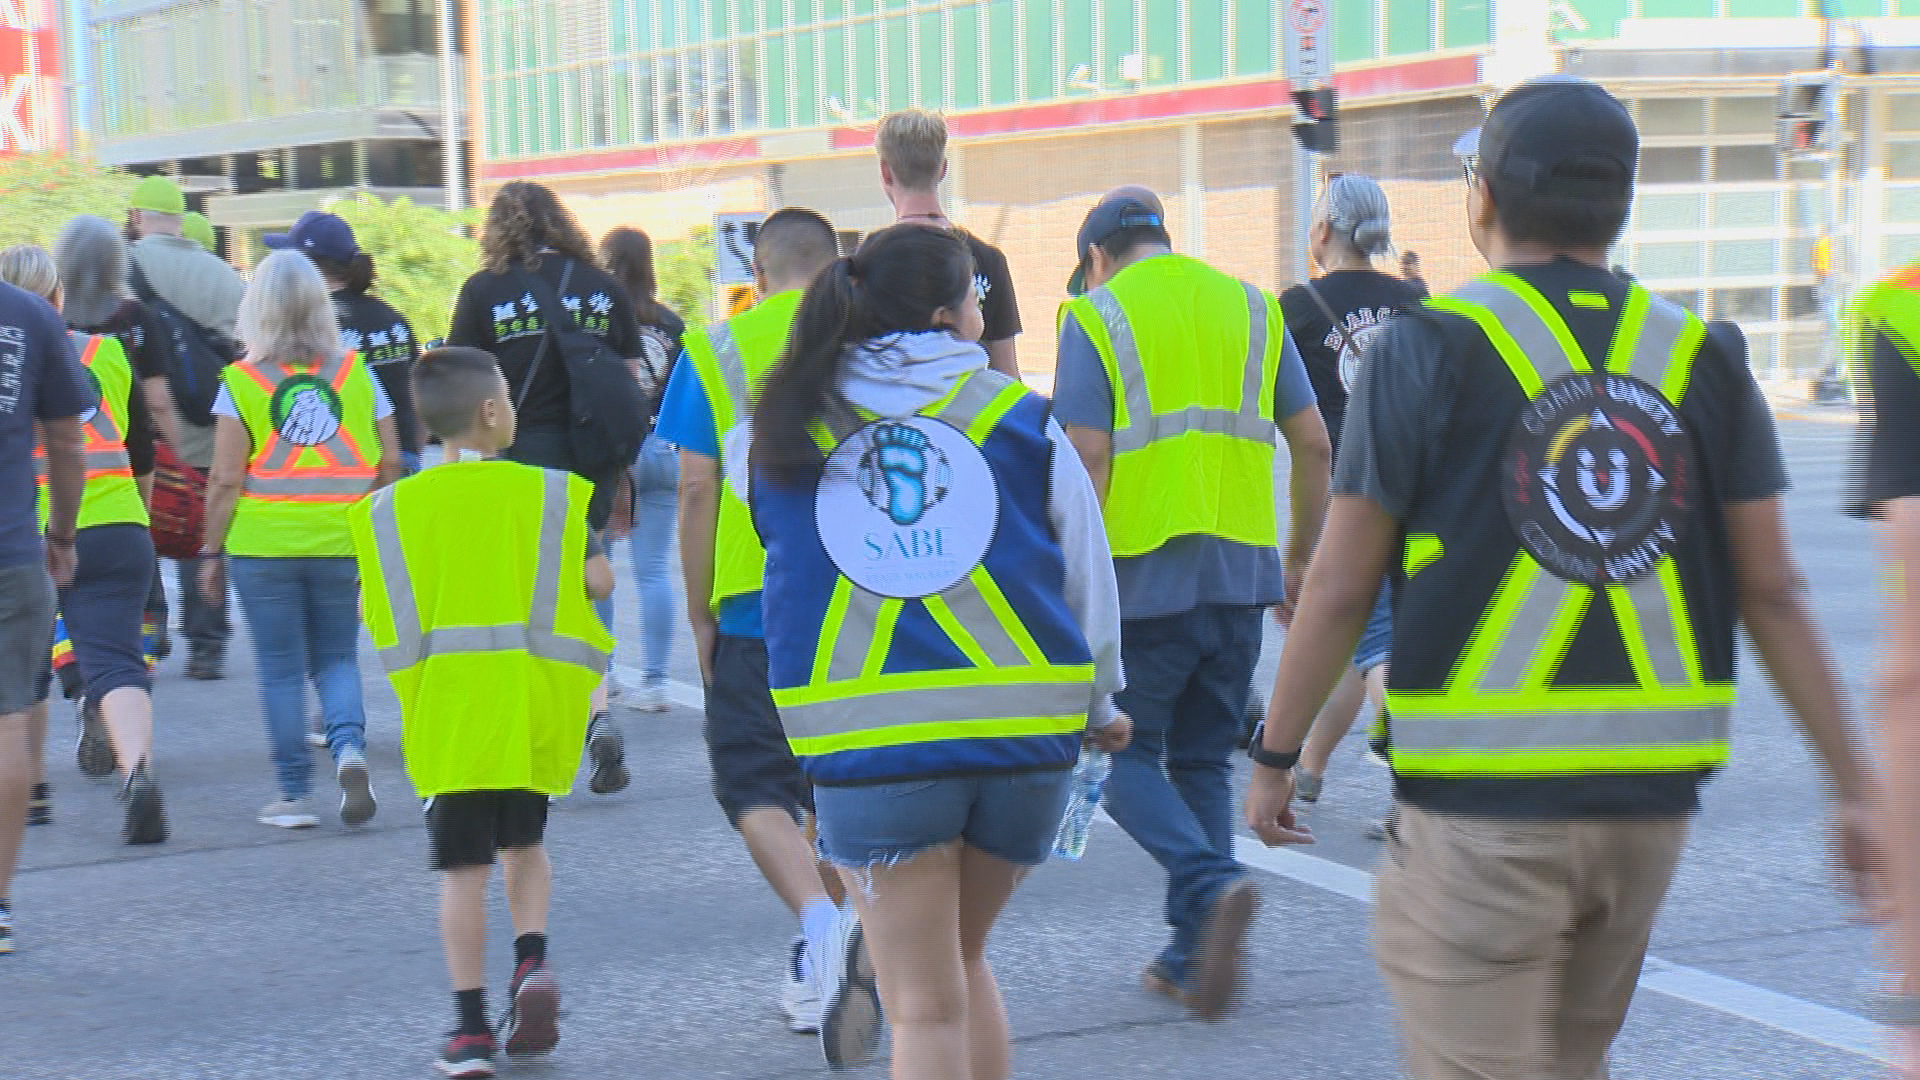 About 200 people from several foot patrols supporting some of Winnipeg's most vulnerable joined forces Saturday, signalling they're ready to collaborate even more to help those in need and reduce crime.